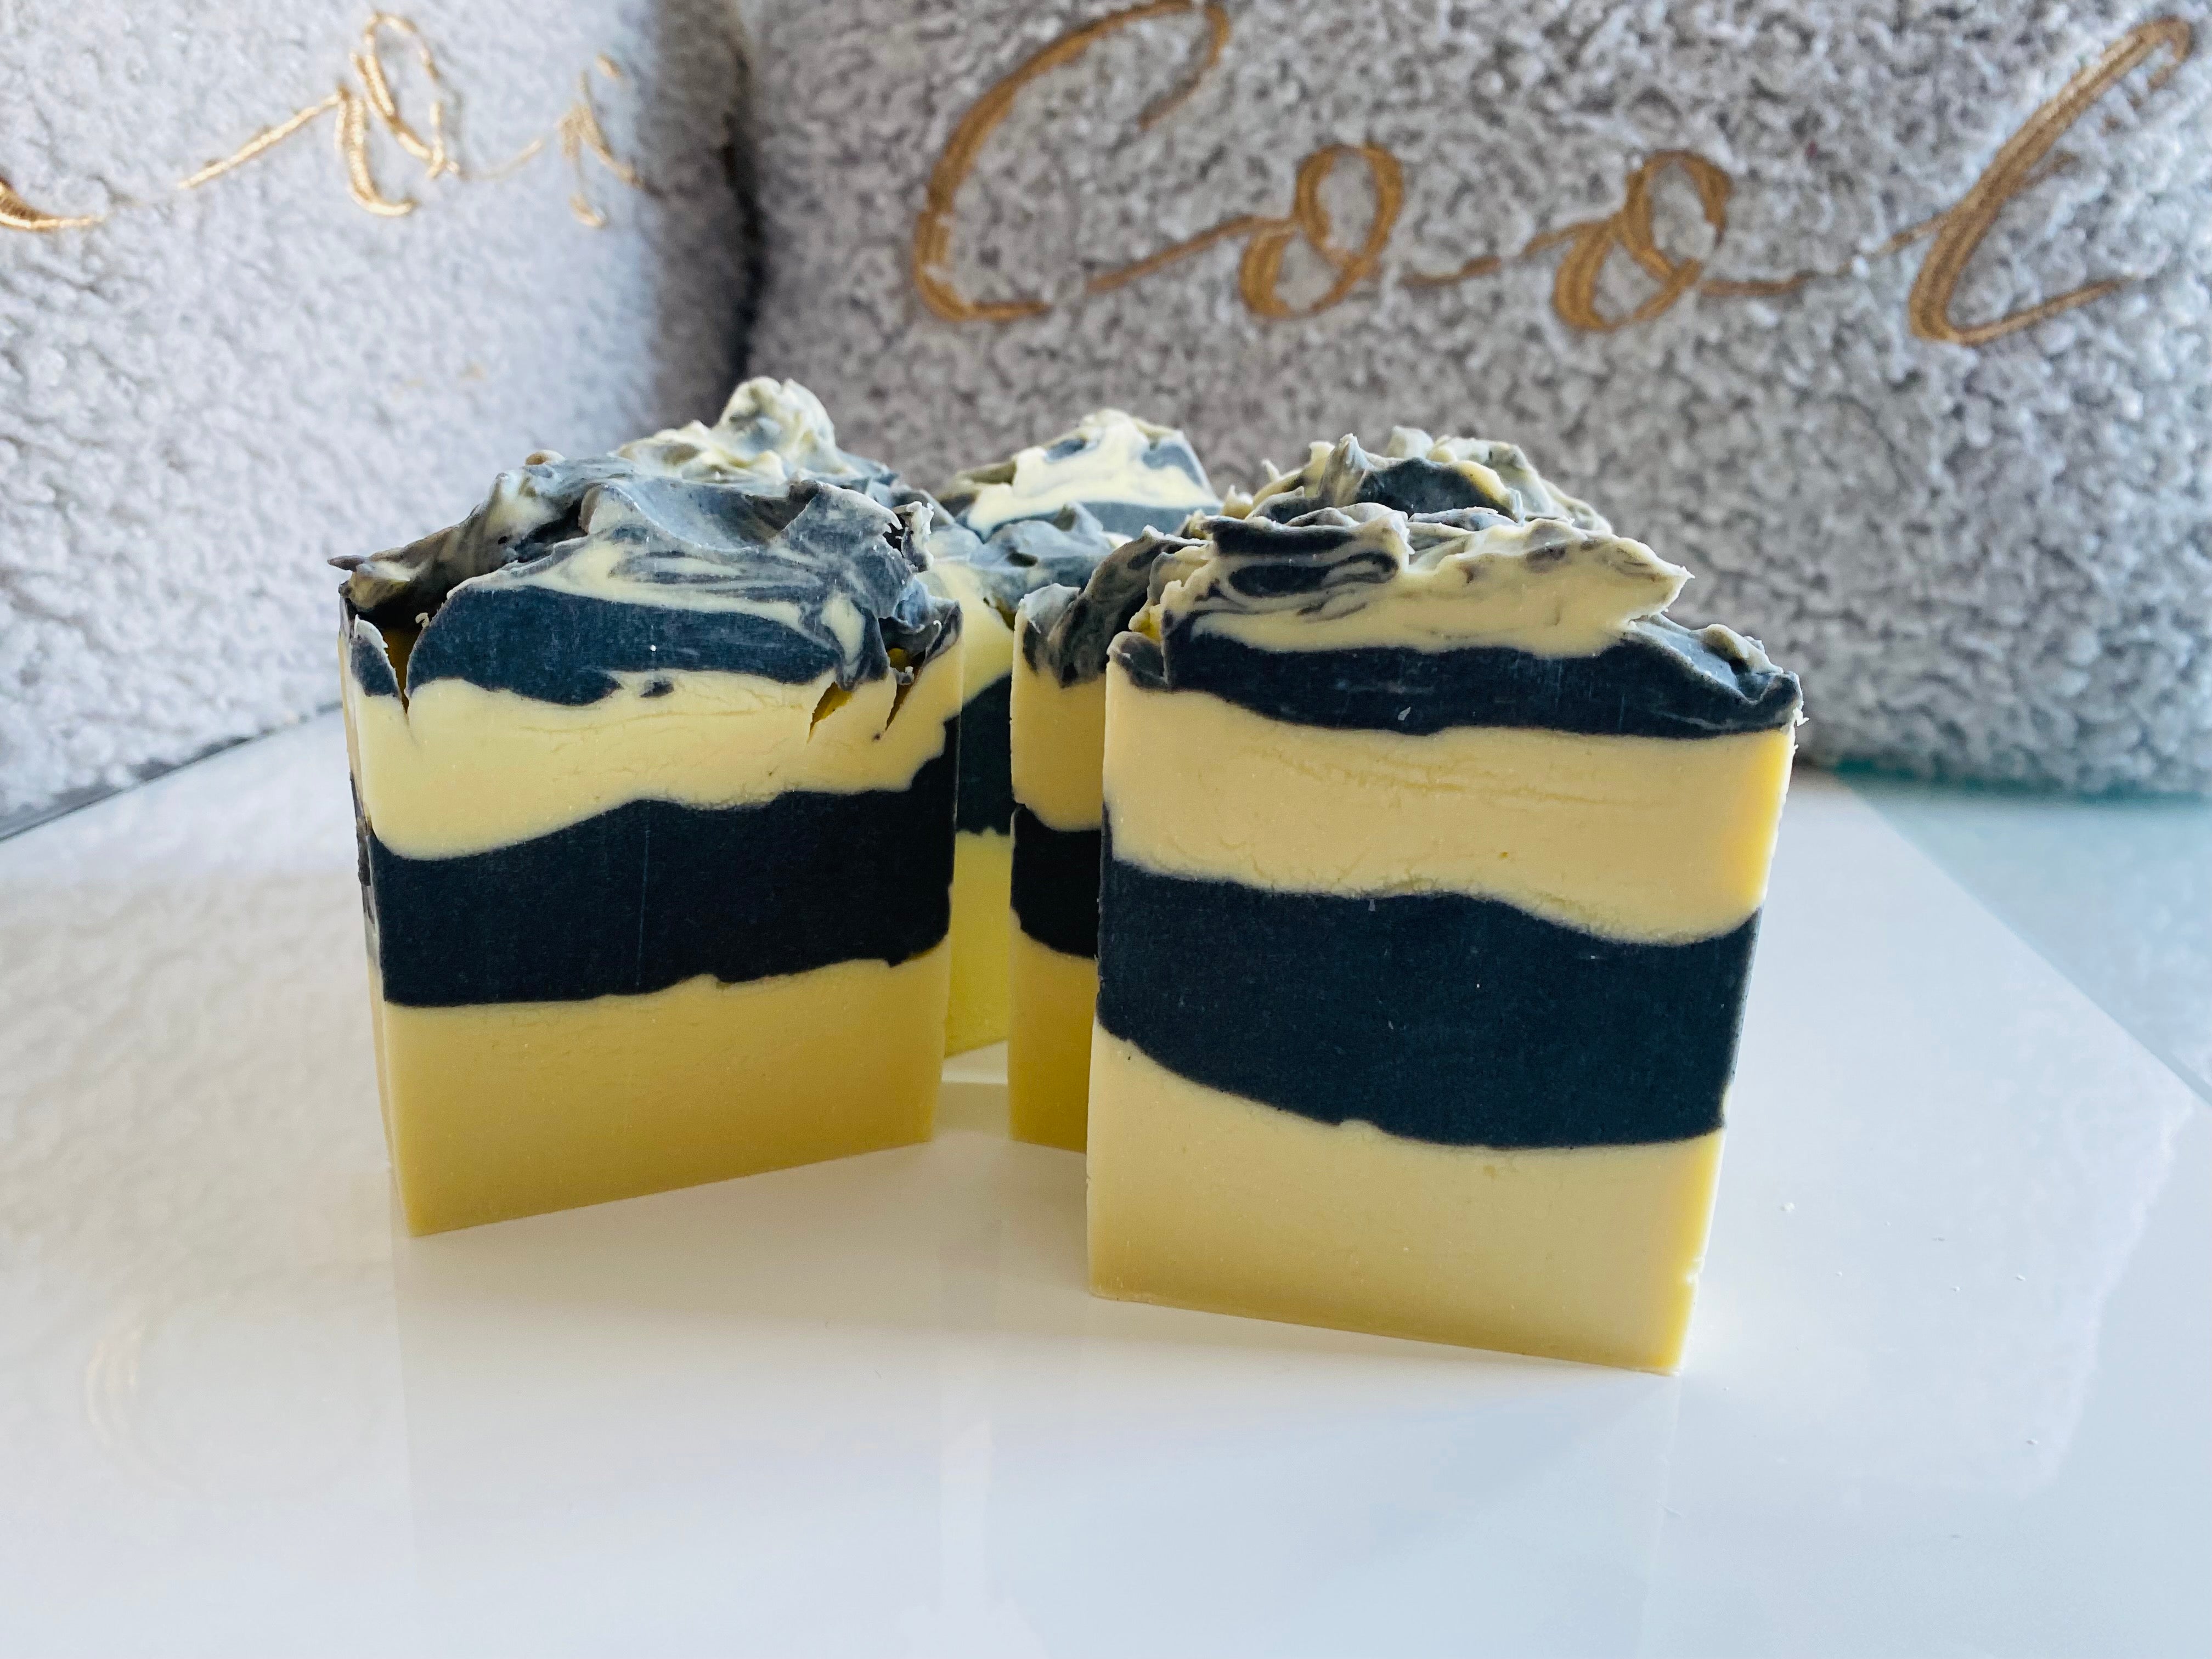 Spirituality & Beauty Homemade Soap - Activated Charcoal